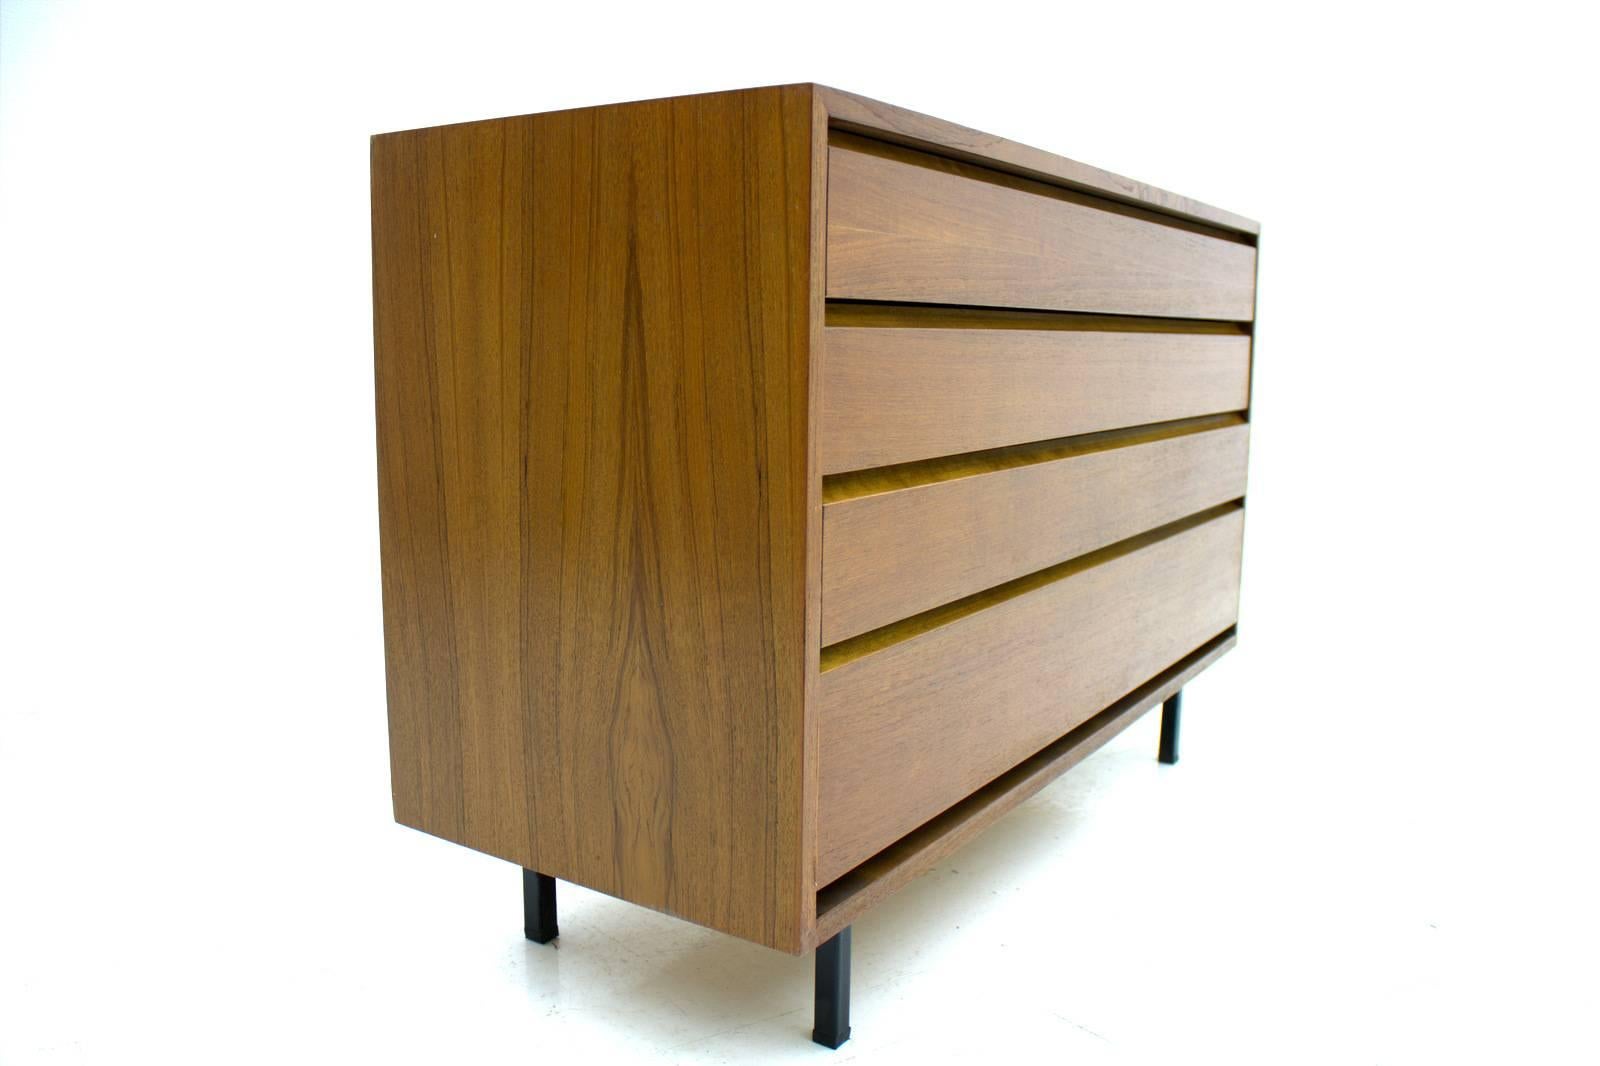 Chest of drawers by Ollie Borg, Finland, 1950s made by Asko, Teak Wood and Metal legs.

Good condition.
     
Worldwide shipping.